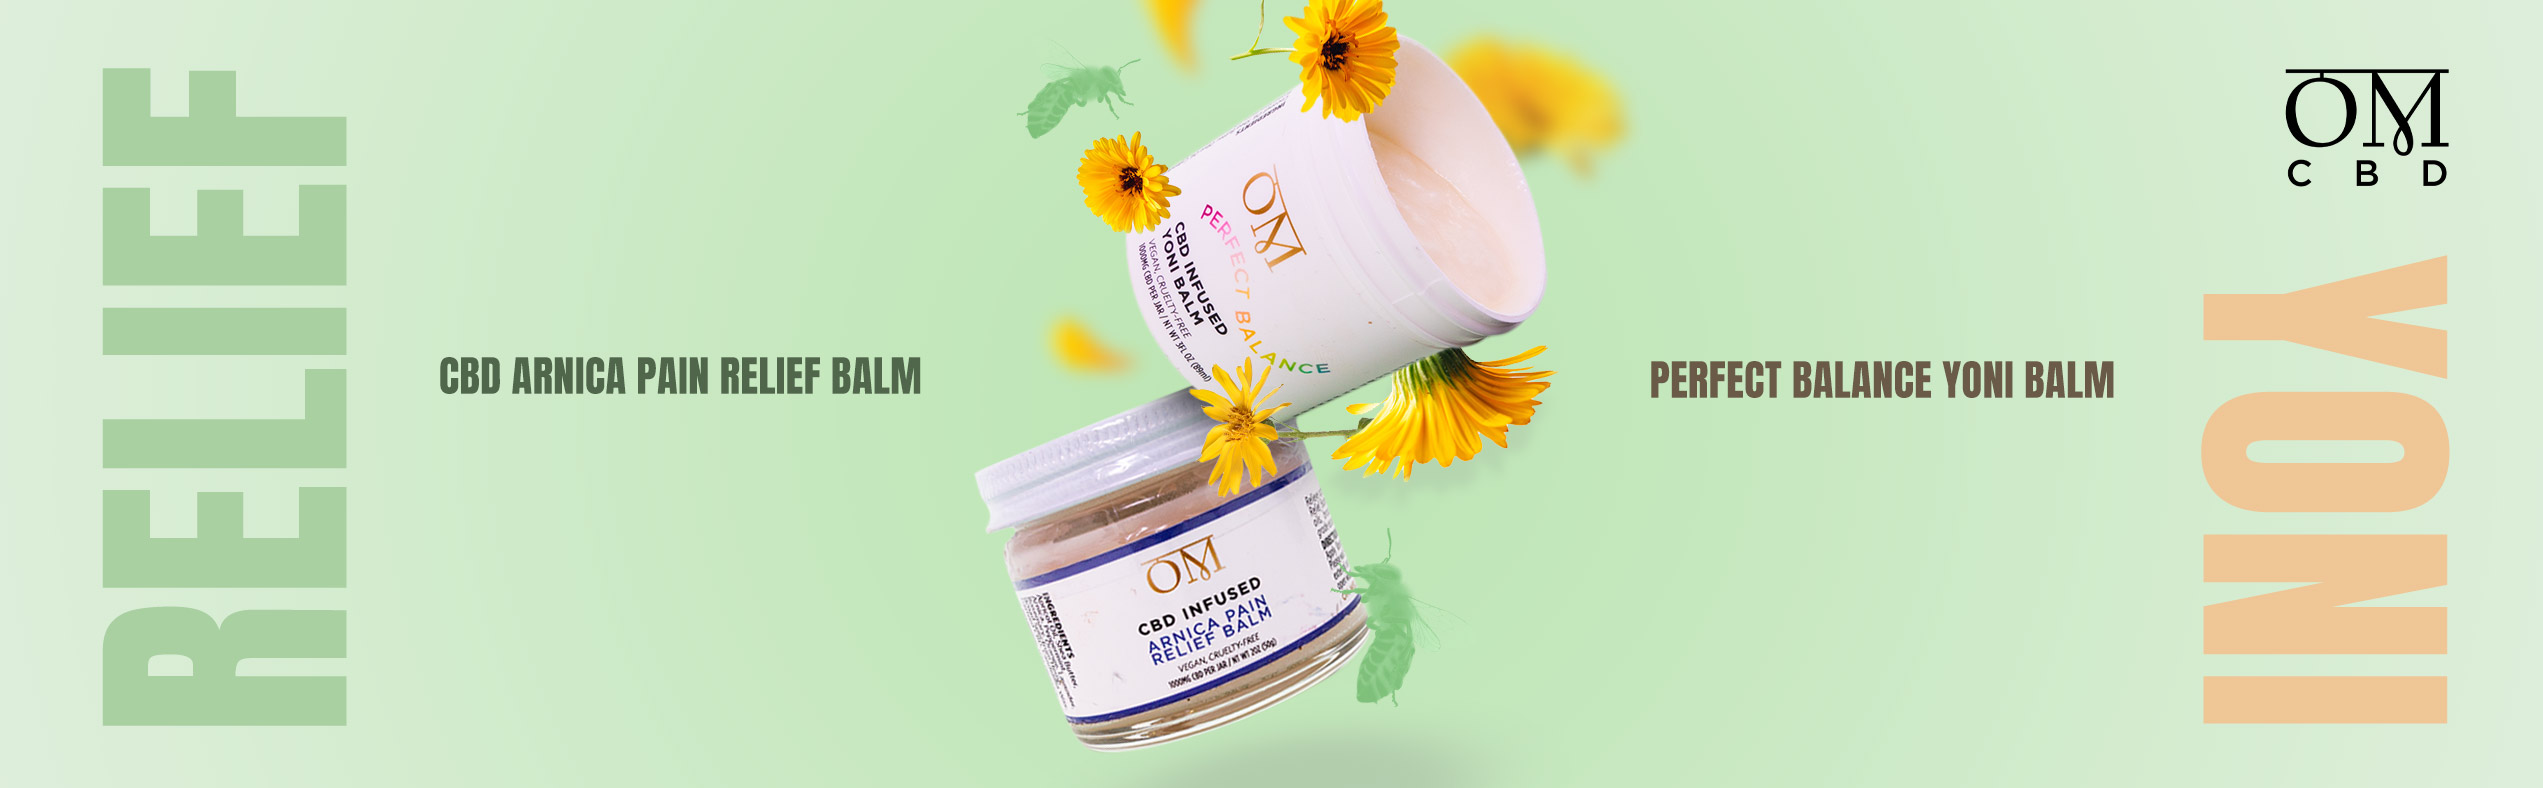 Perfect Balance Yoni Balm and CBD Arnia Pain Relief Balm by OM Wellness